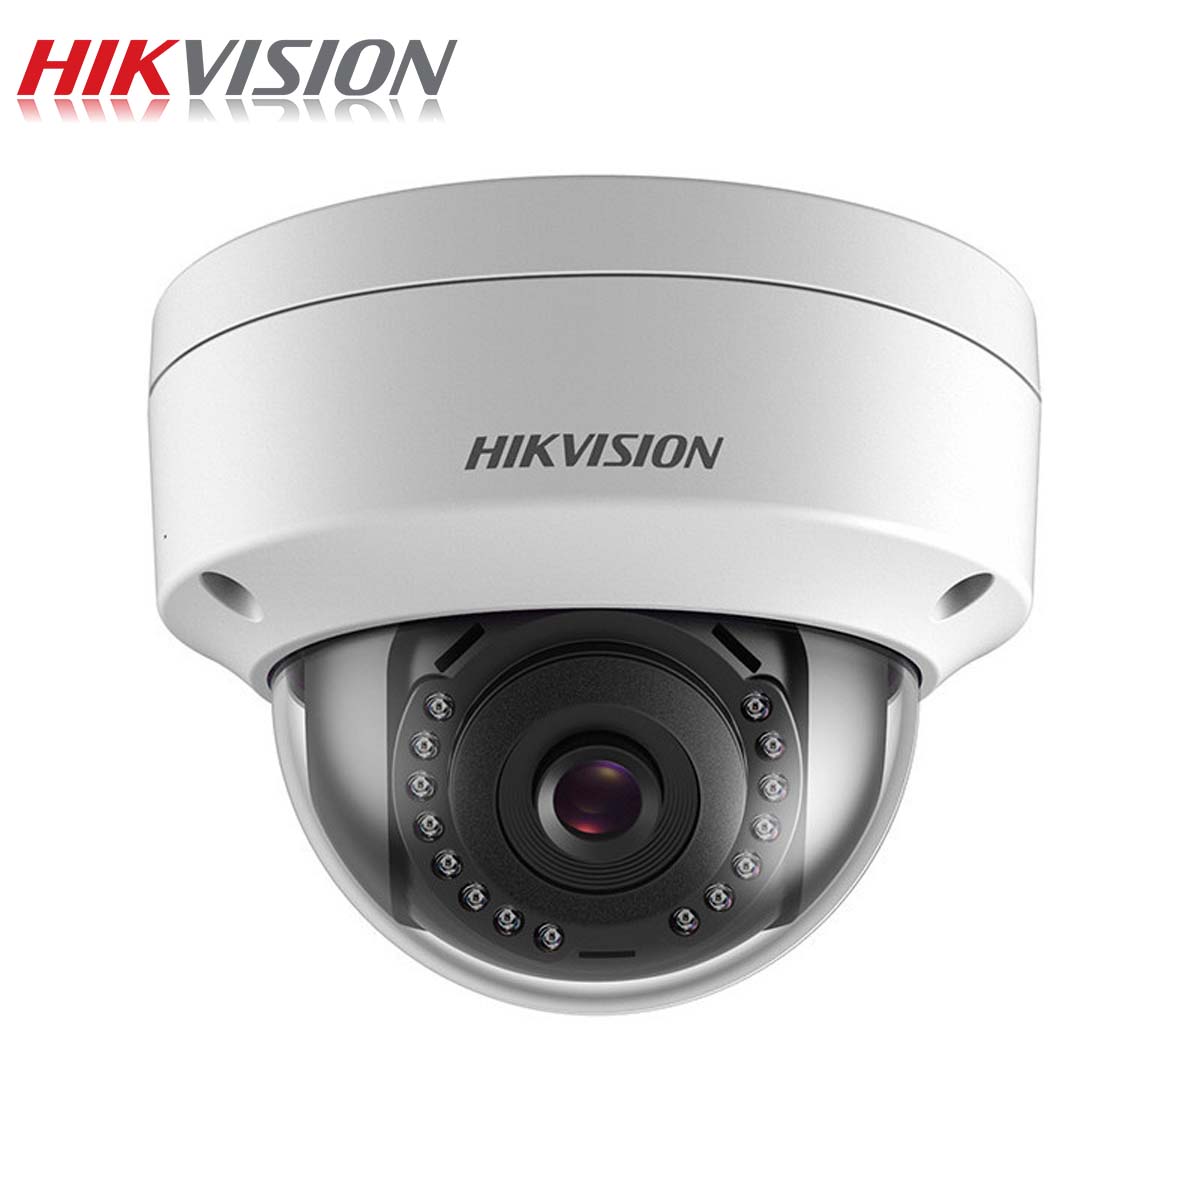 HIKVISION 2 MP Fixed Dome Network Camera